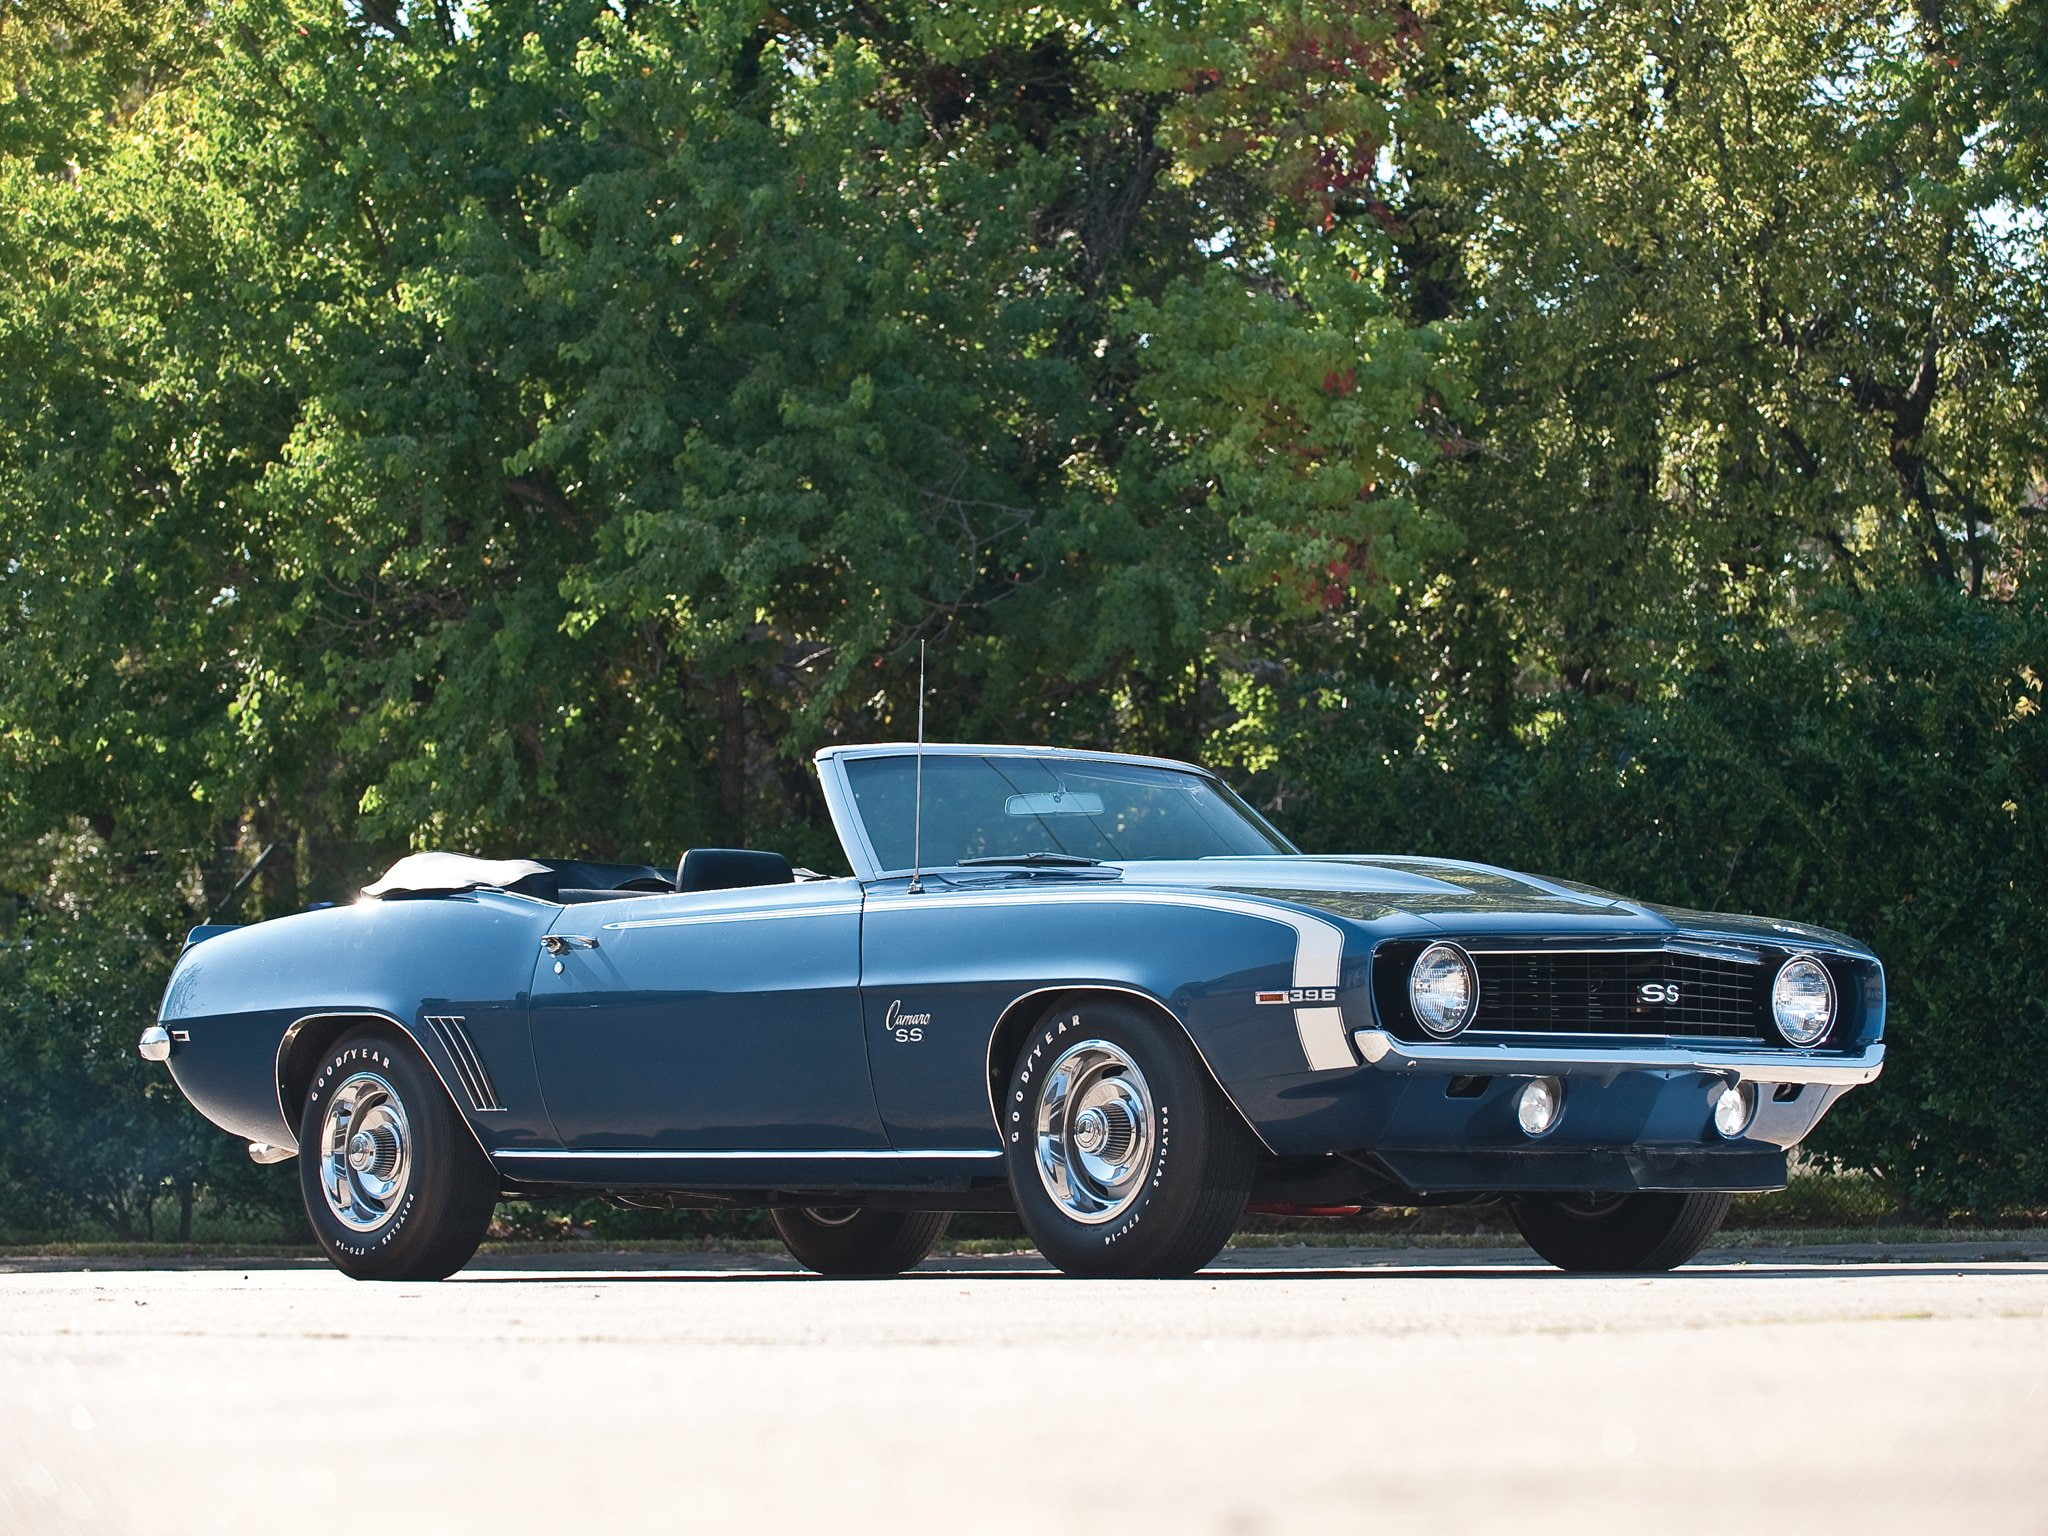 1969, 396, camaro, chevrolet, classic, convertible, muscle